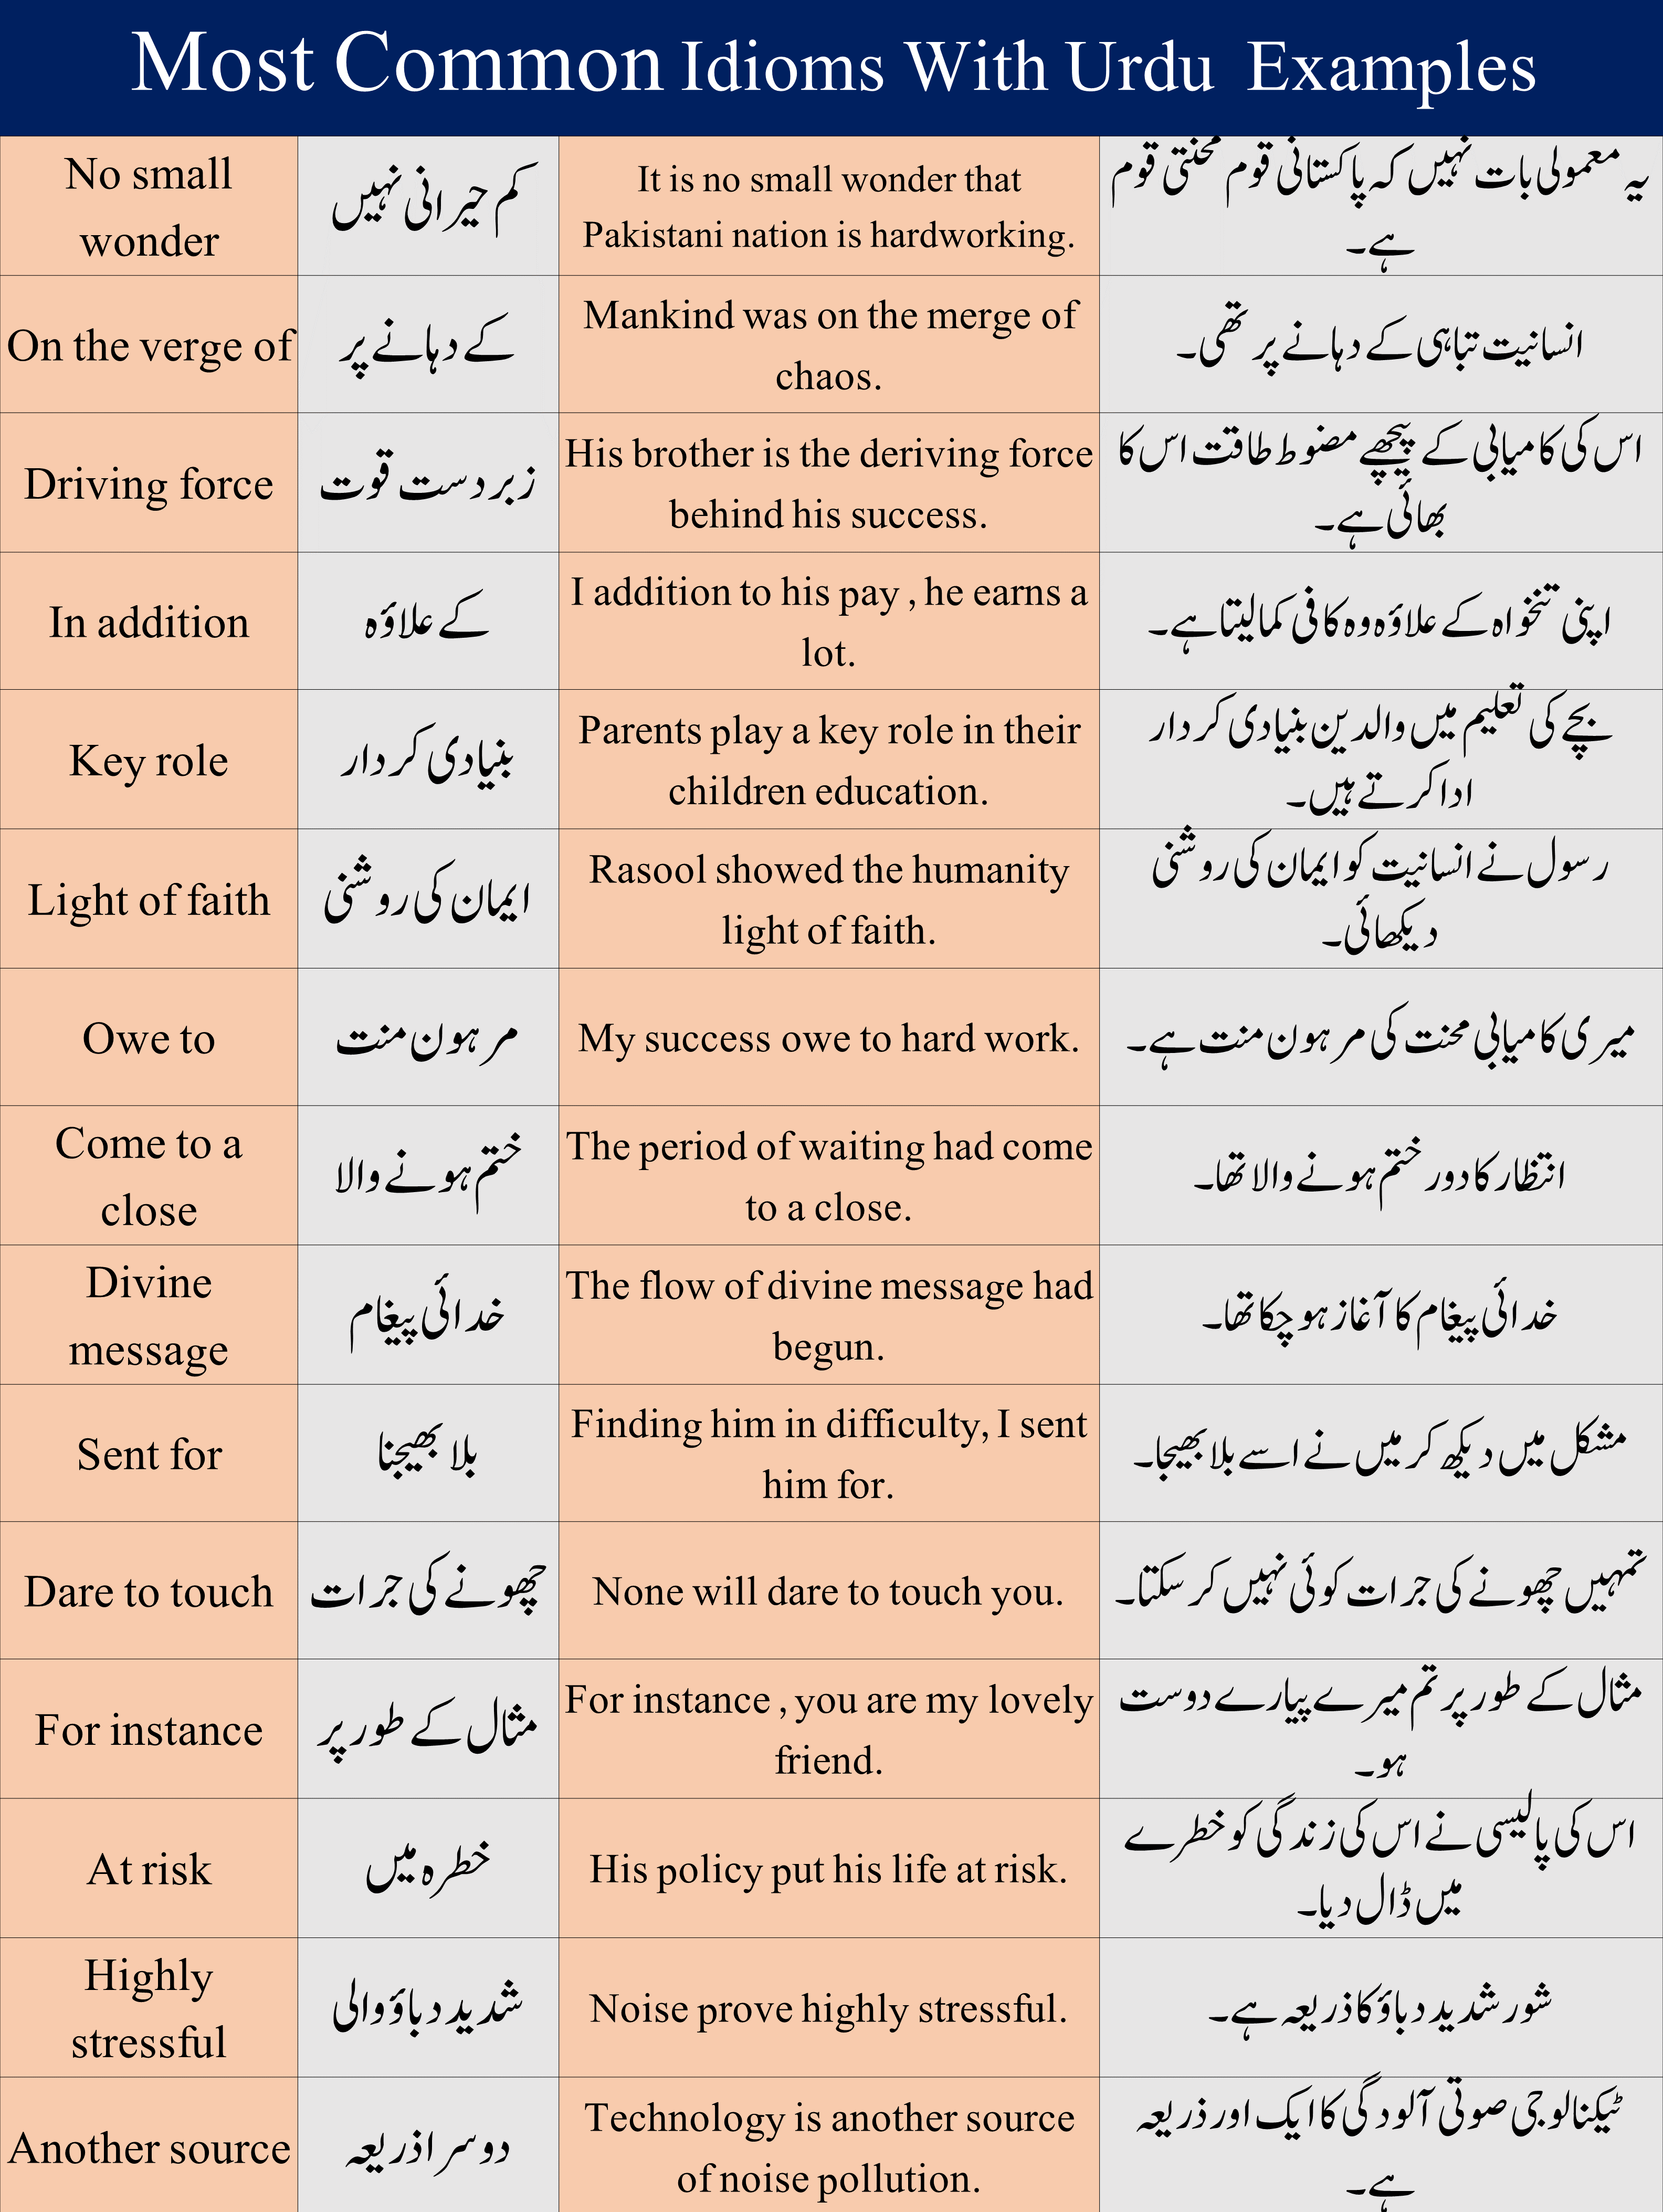 Most Common Idioms With Examples In Urdu & Hindi Meanings